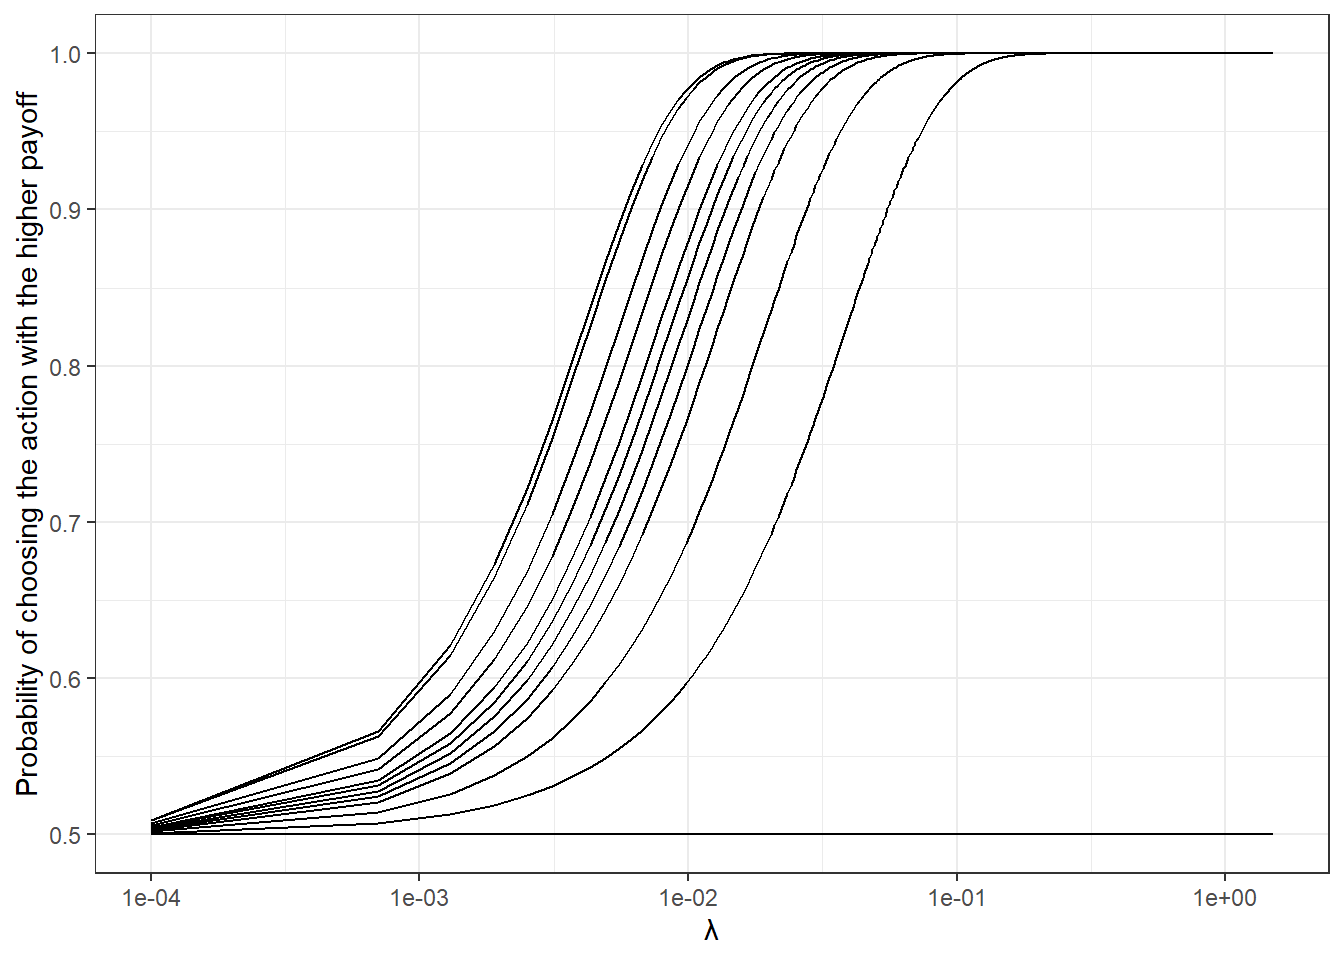 Probability of choosing the optimal action for selfish decison-makers as a function of choice precision $\lambda$. Each curve shows the model's prediction for a different payoff difference from the experiment.